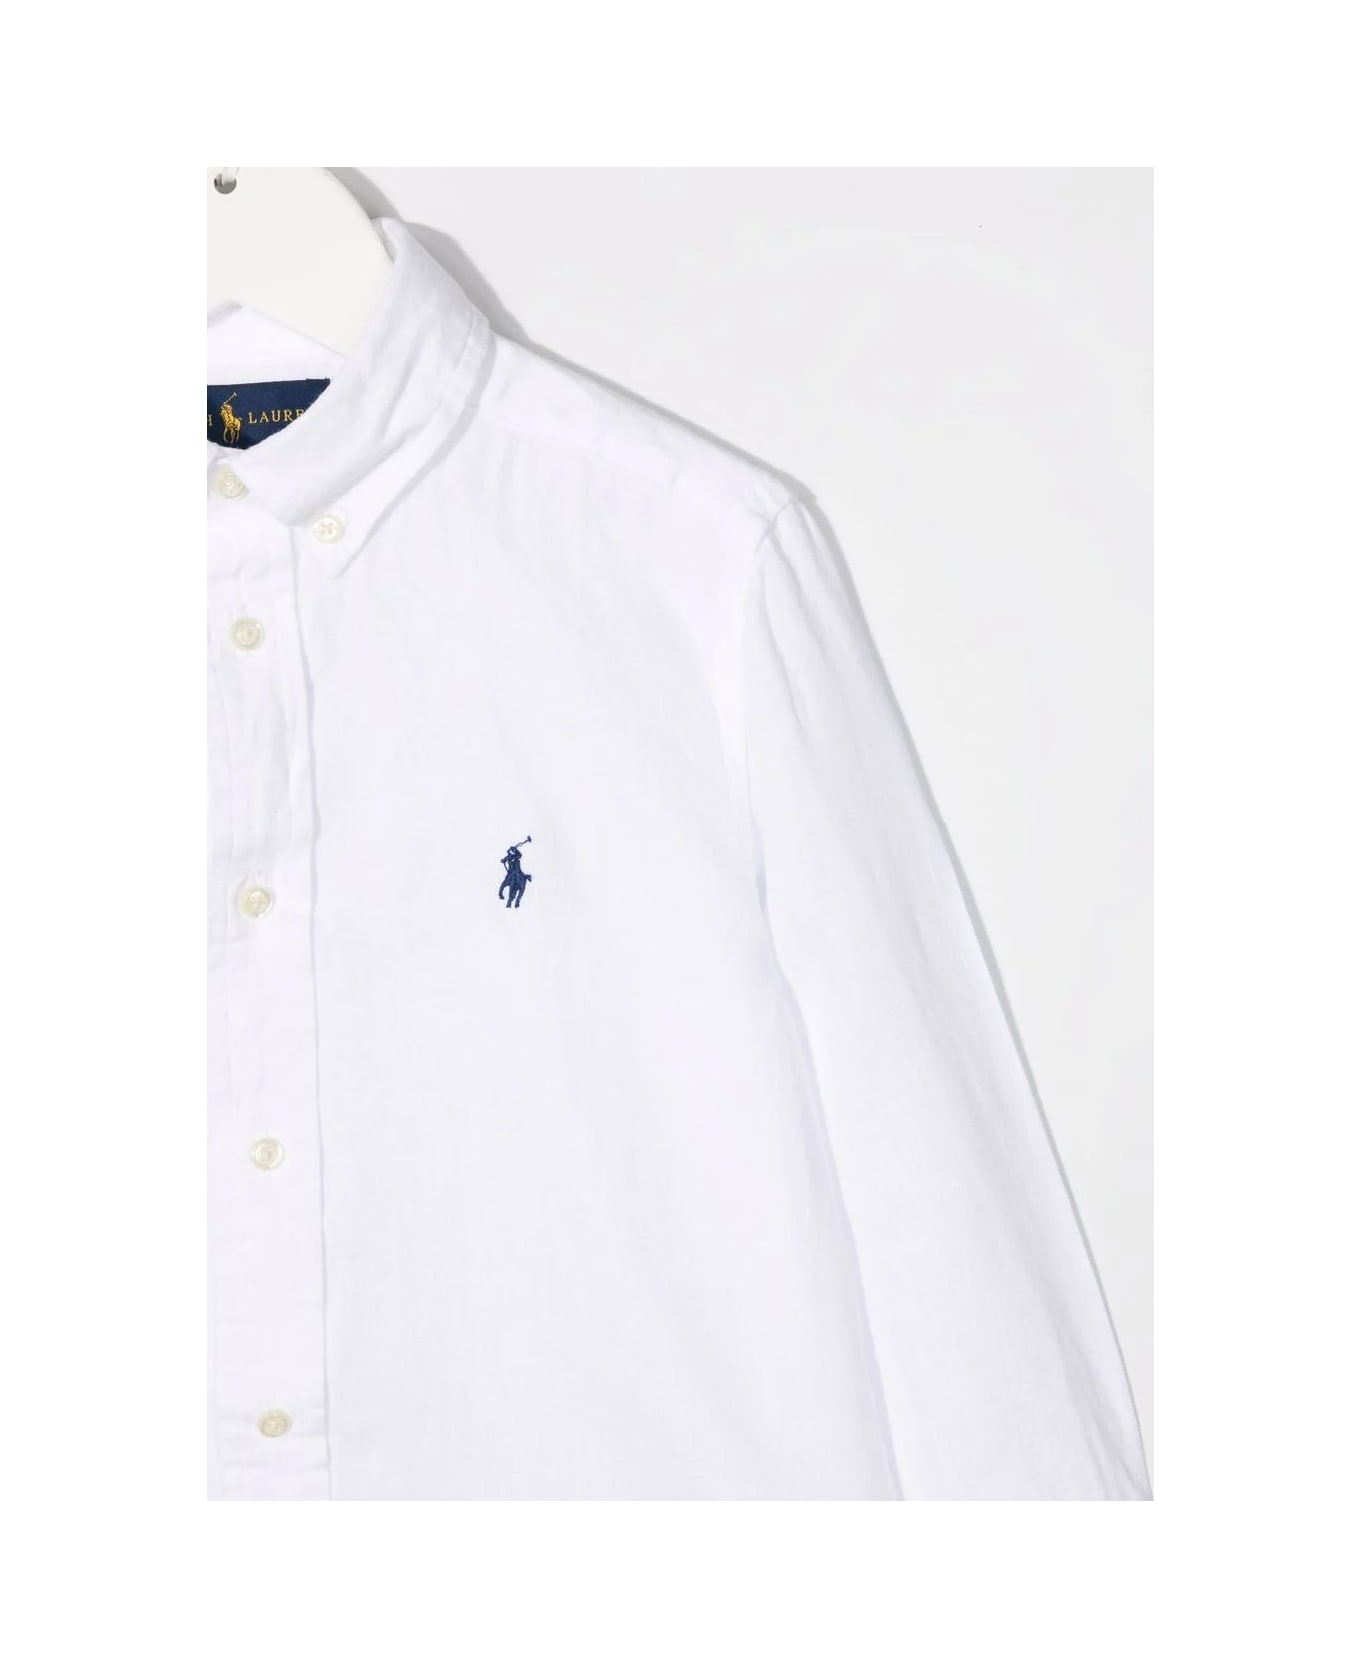 Ralph Lauren White Linen Shirt With Embroidered Pony - White シャツ